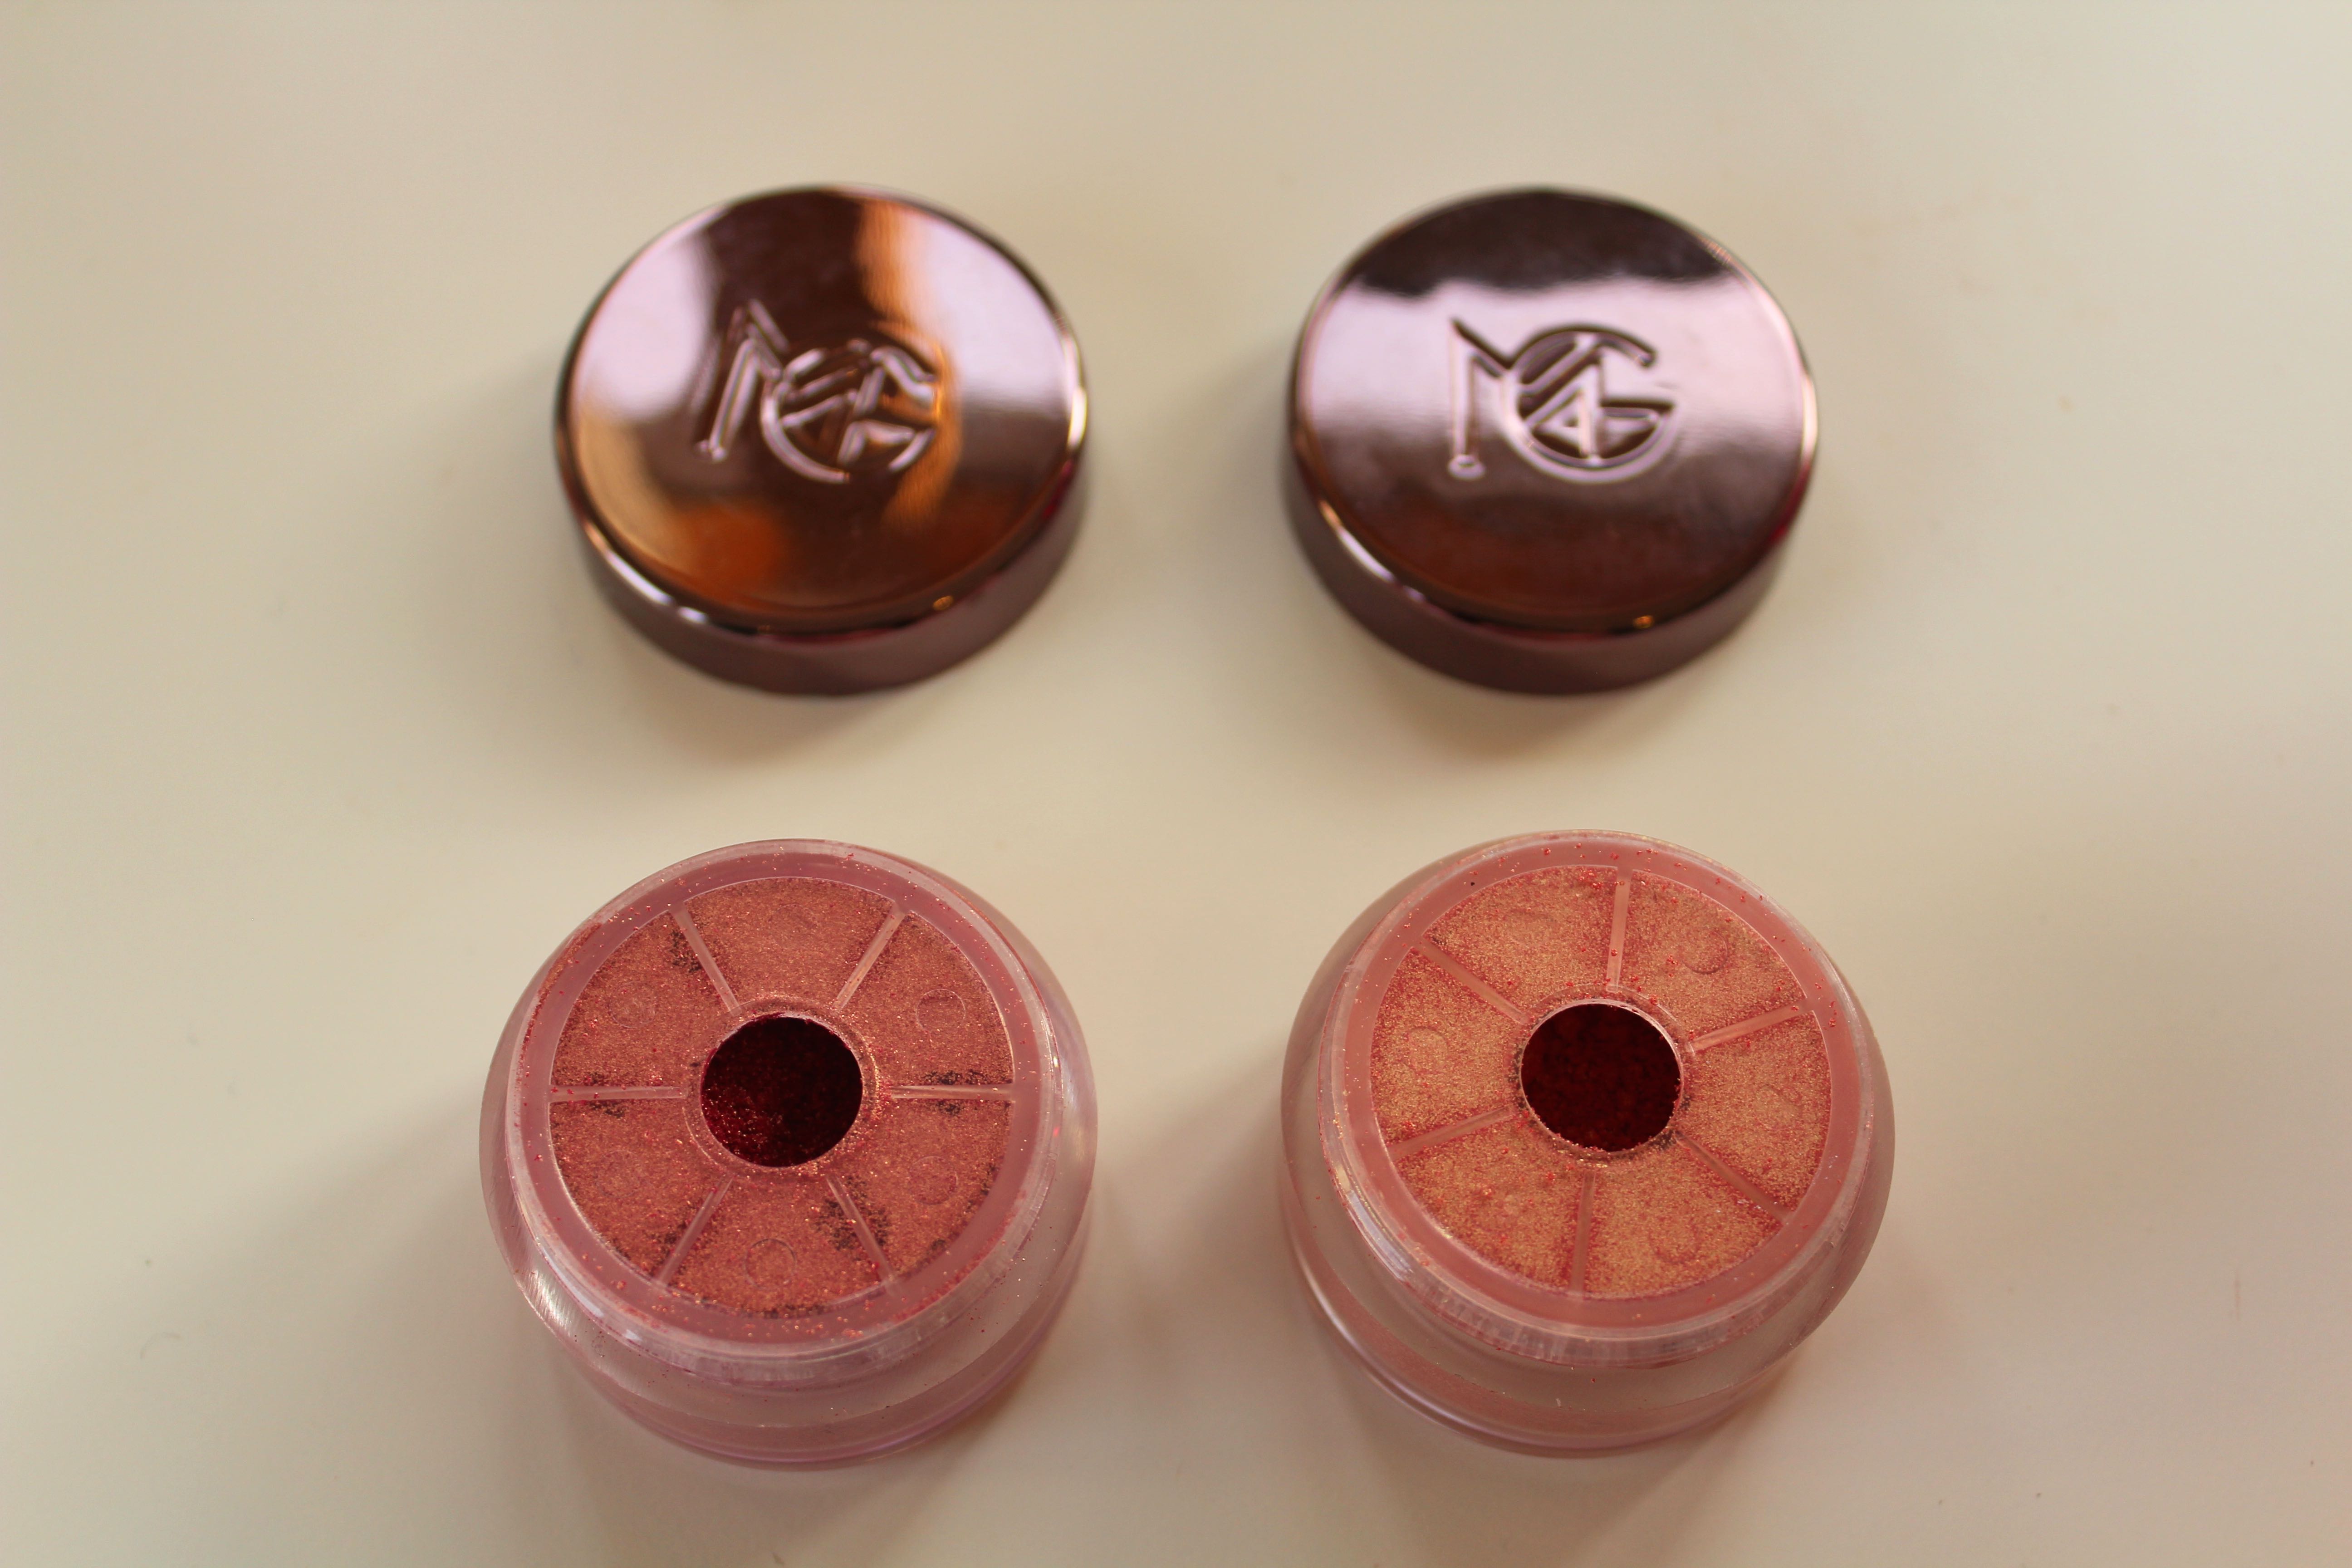 Makeup Geek Duo Chrome Pigments in Hologram and Wildfire